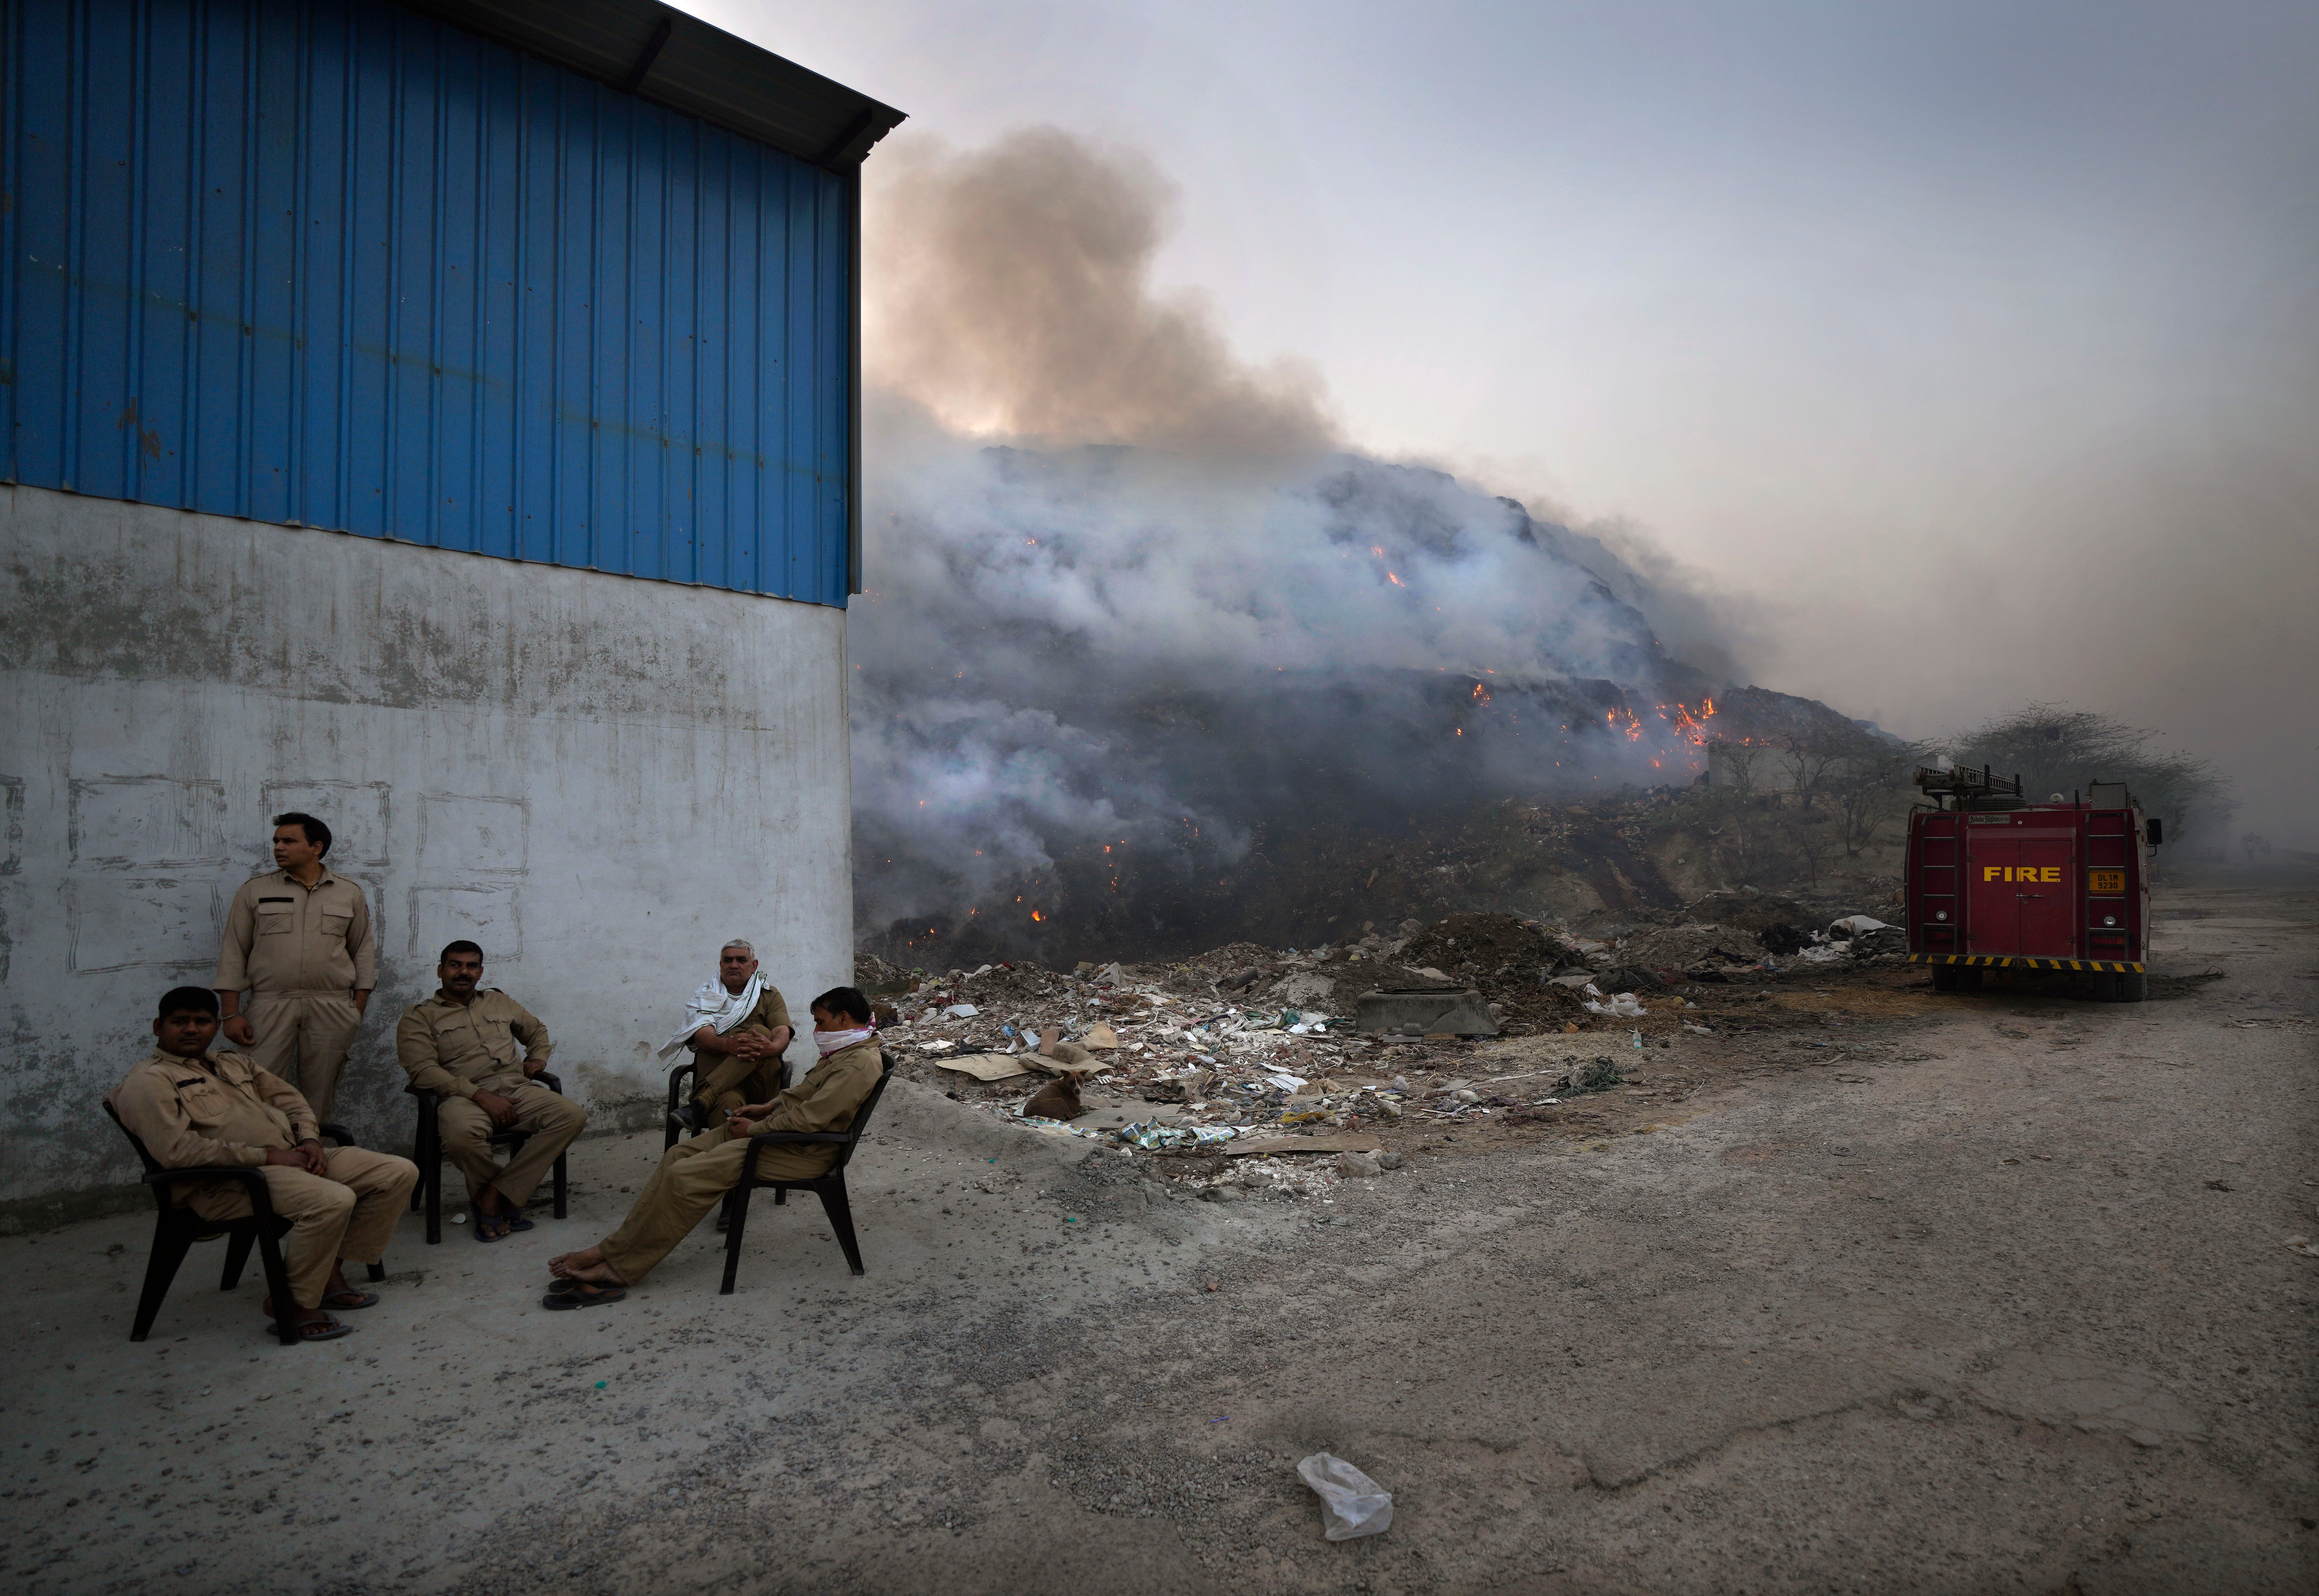 Officials take a break from firefighting. (Photo: Manish Swarup, AP)